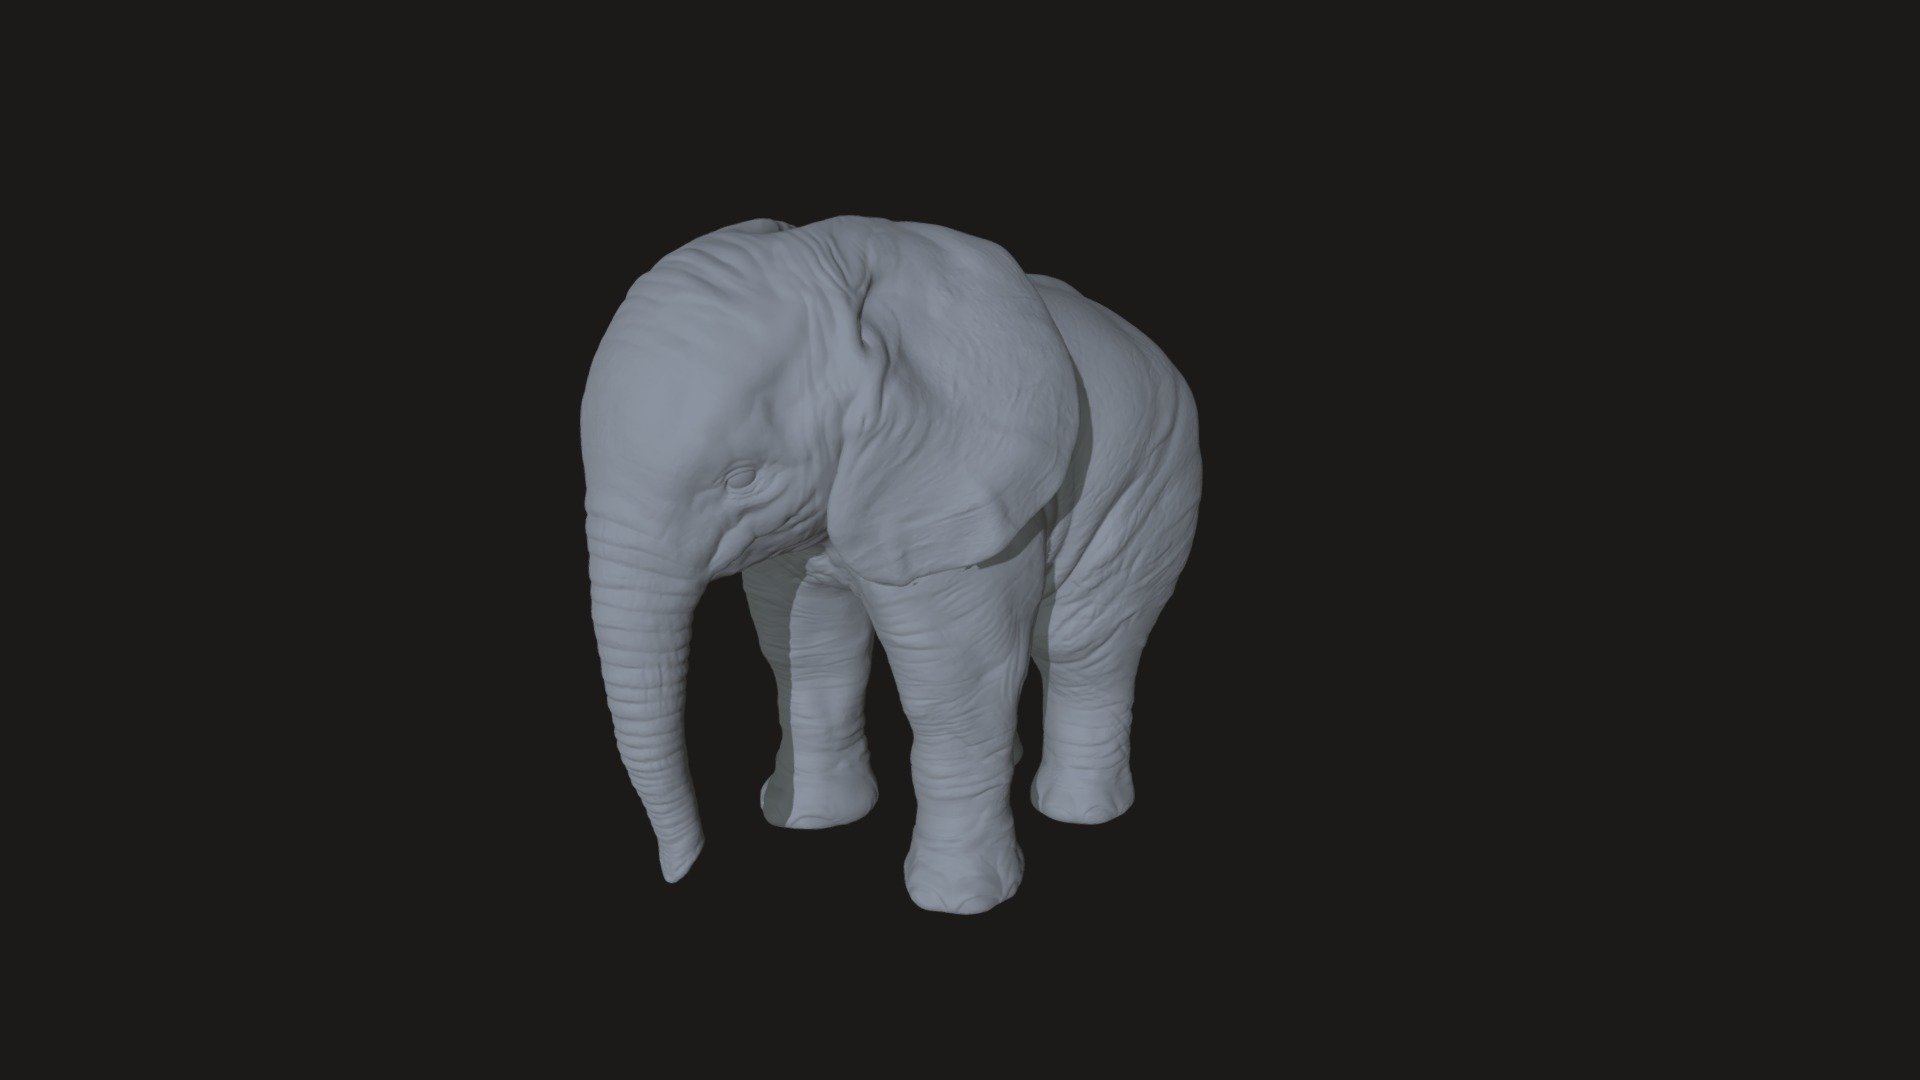 If you want to buy this cute baby elephant contact me at cyrielchd@gmail.com 
Price : 40$ - Elephant - 3D model by cyriel (@cyrielc) 3d model